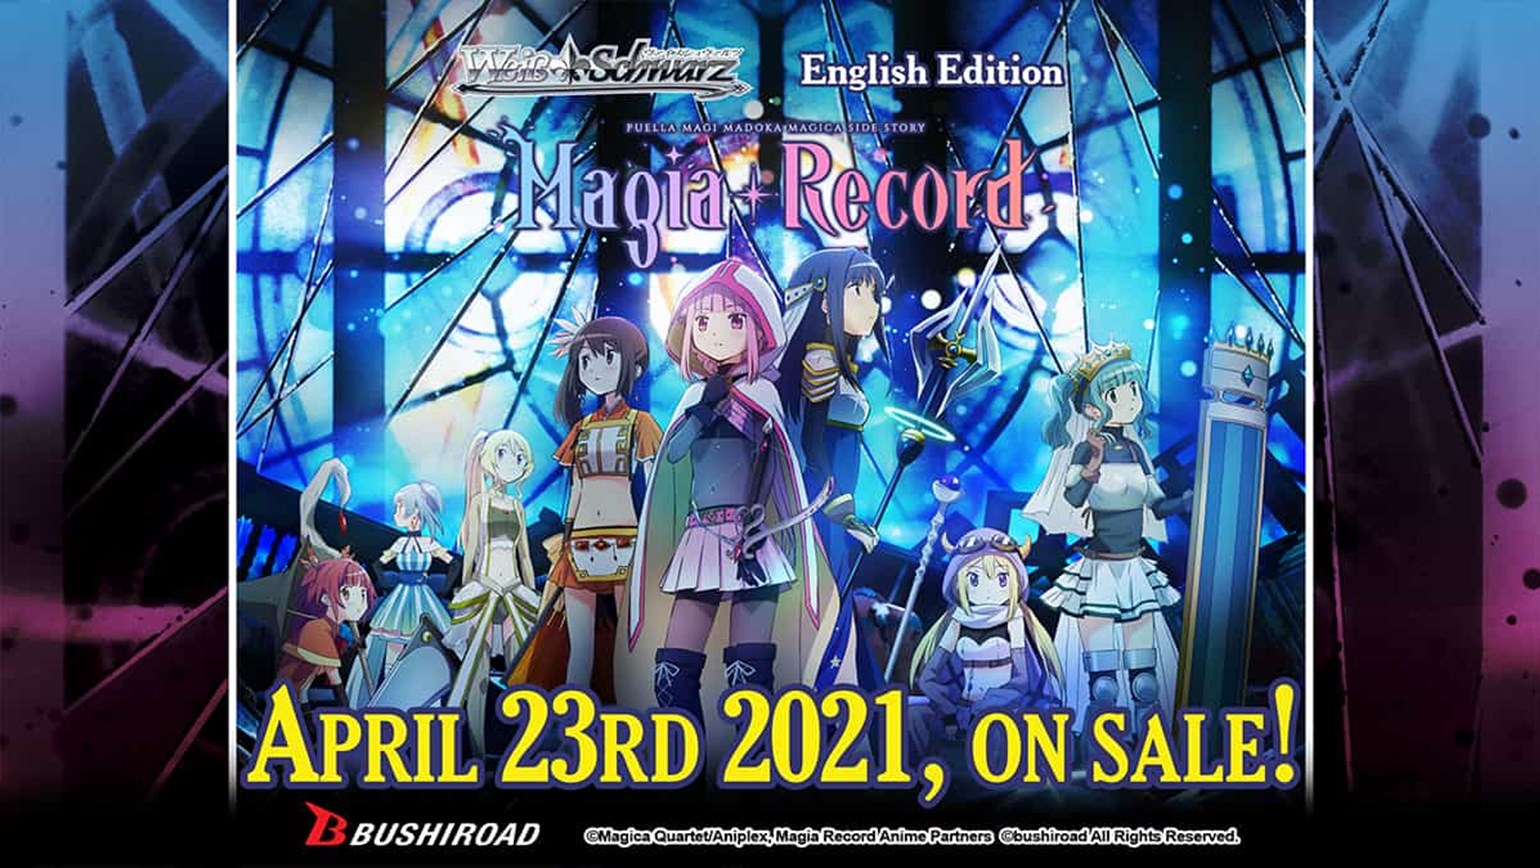 Weiss Schwarz: TV Anime “Magia Record: Puella Magi Madoka Magica Side Story” On Sale April 23rd!